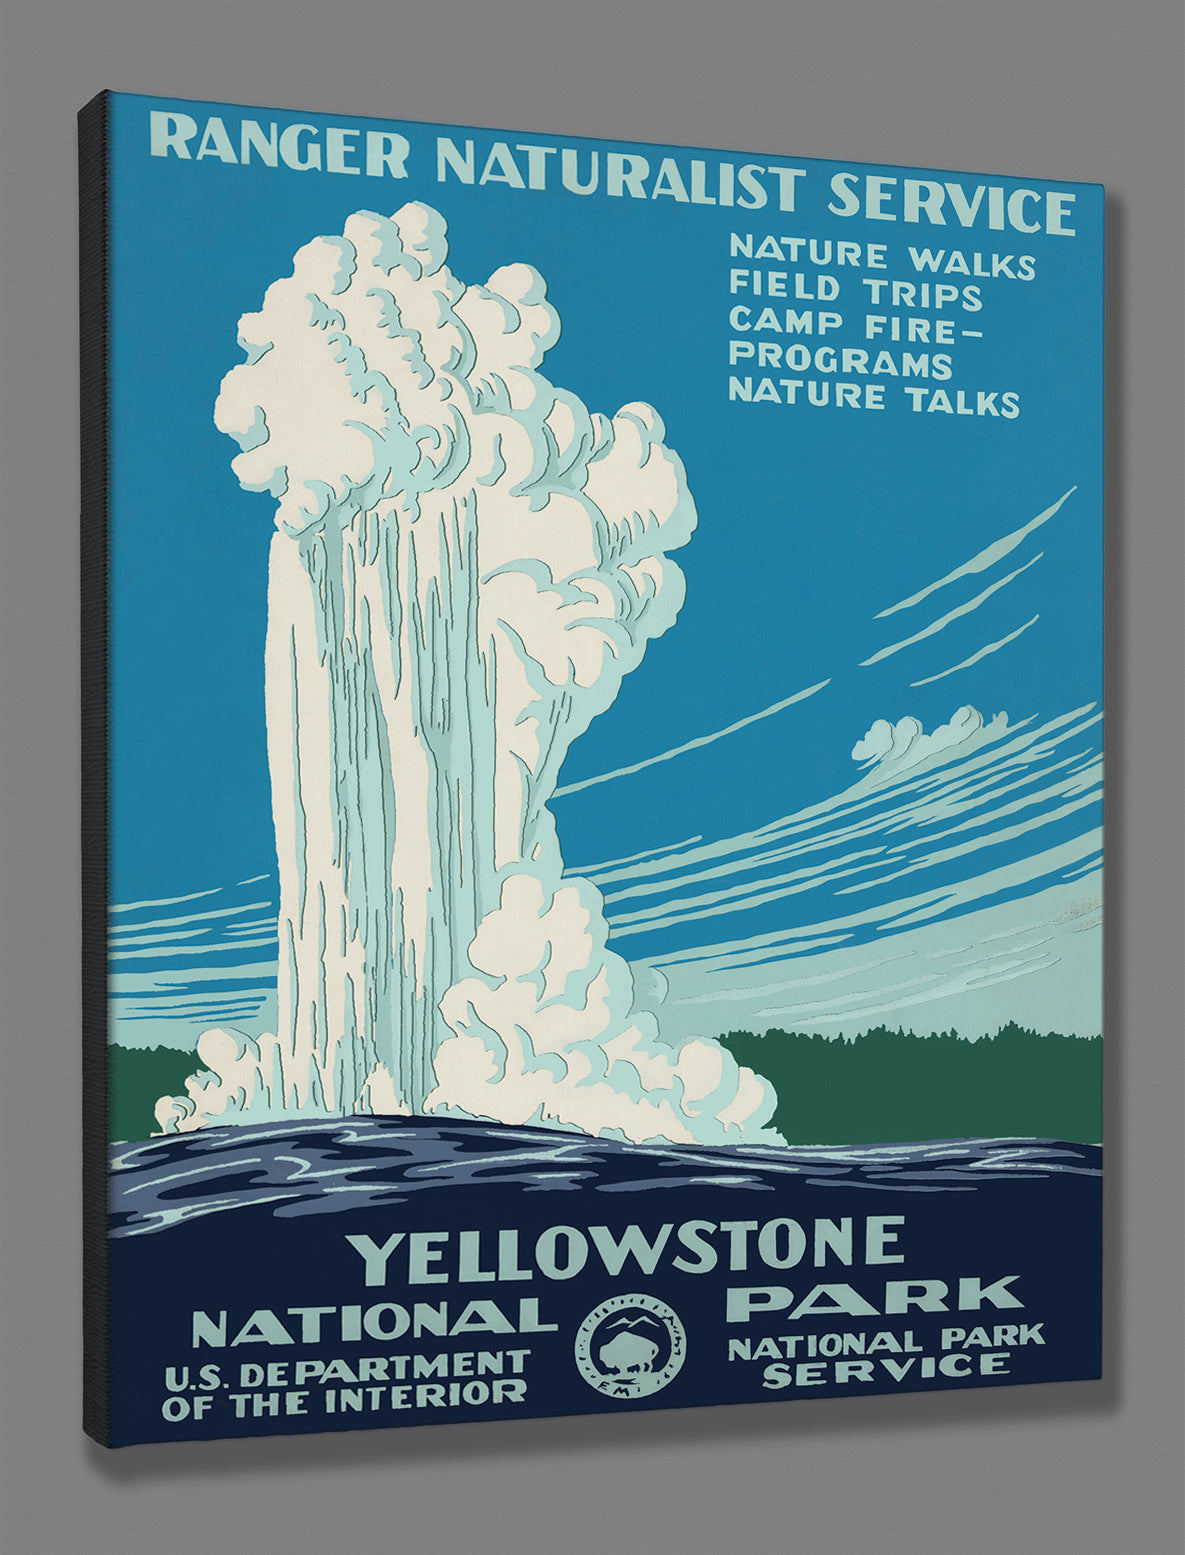 A stretched canvas print of a vintage poster featuring Yellowstone National Park